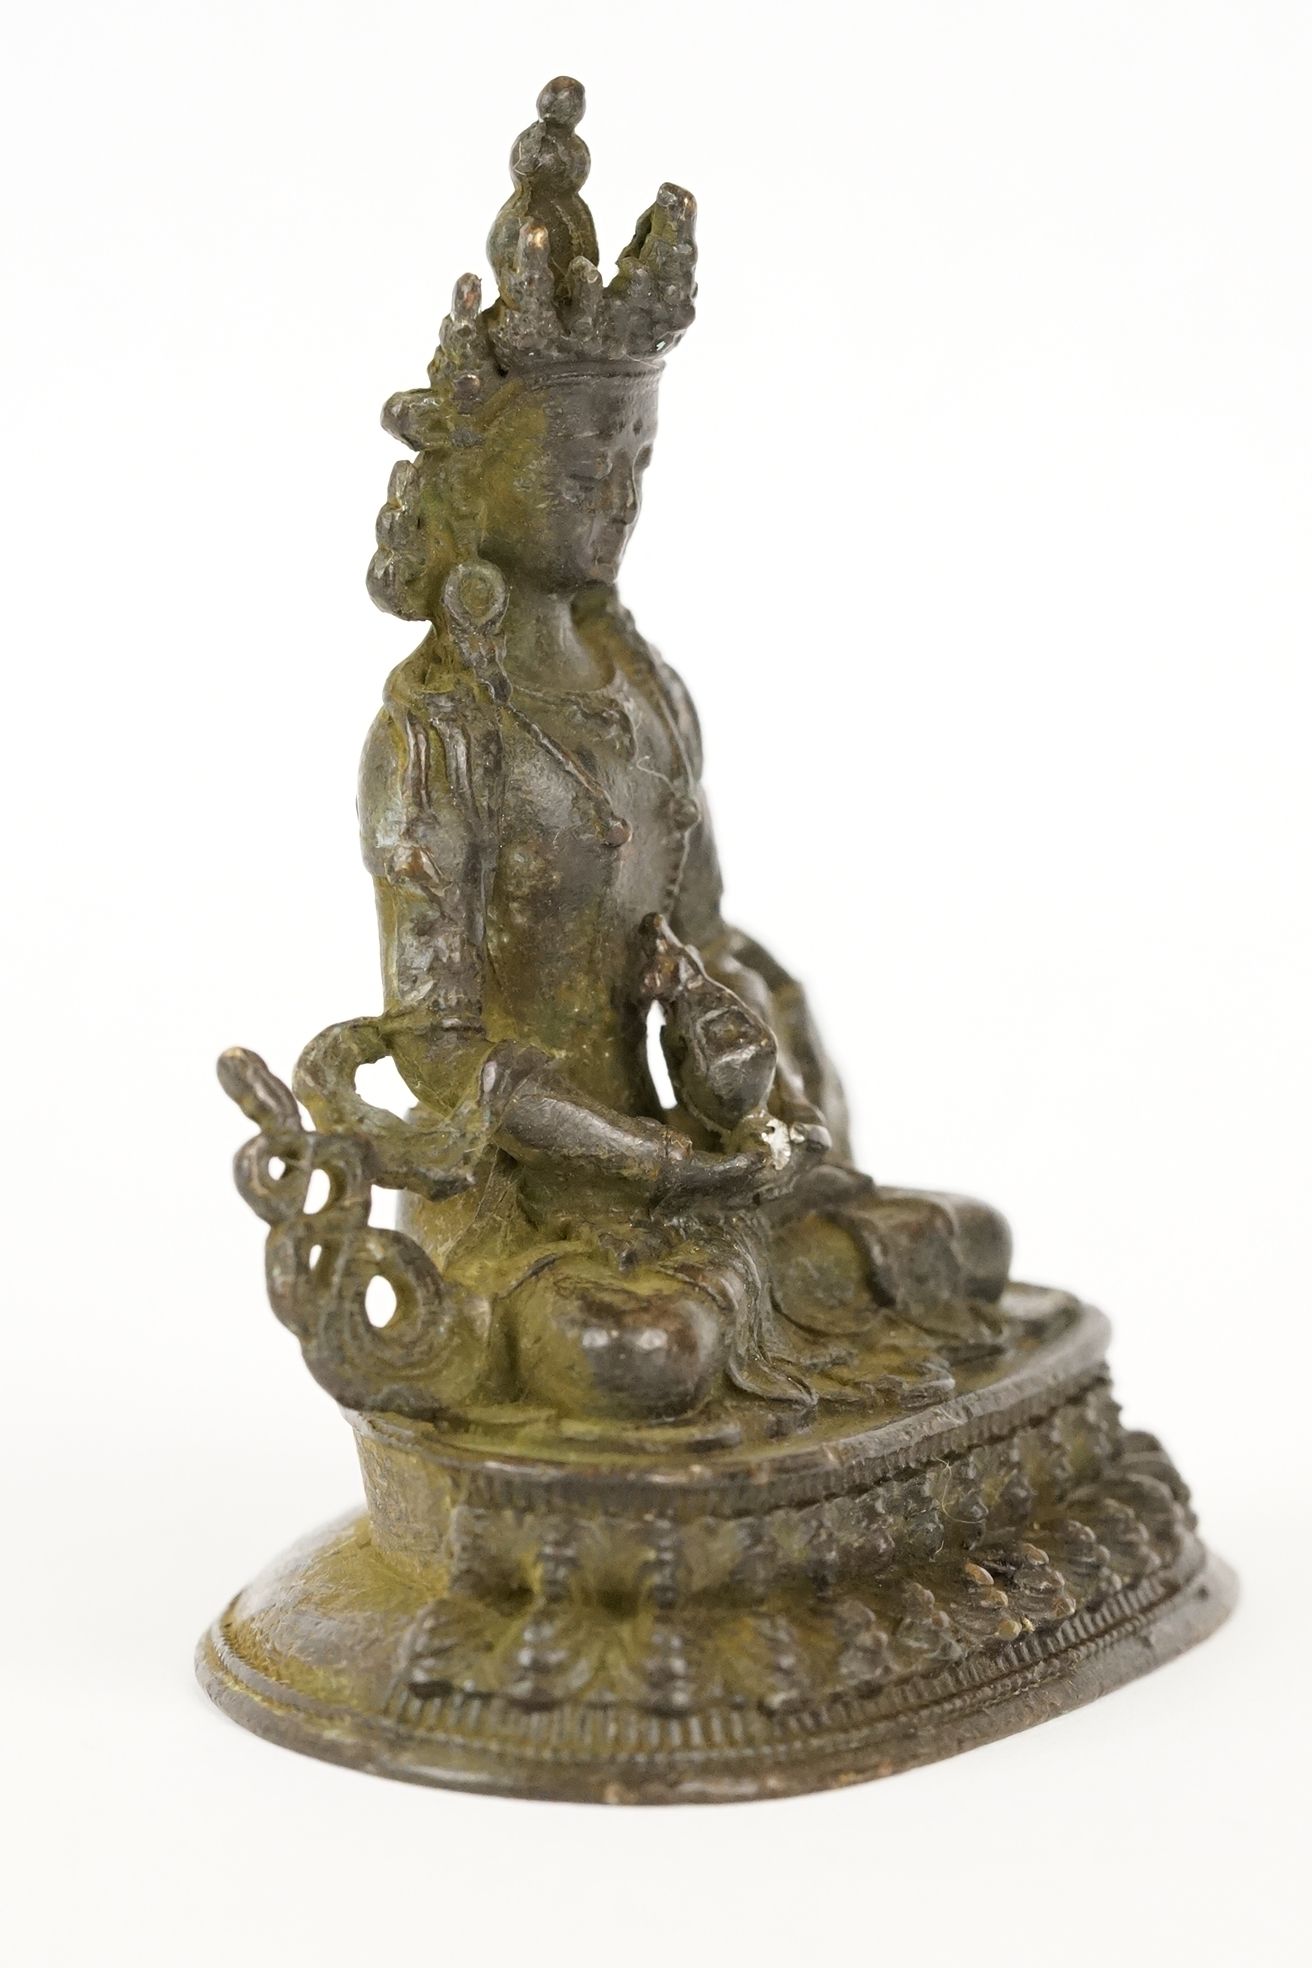 Buddhist bronze figure of Guan Yin in a seated pose - Image 2 of 4